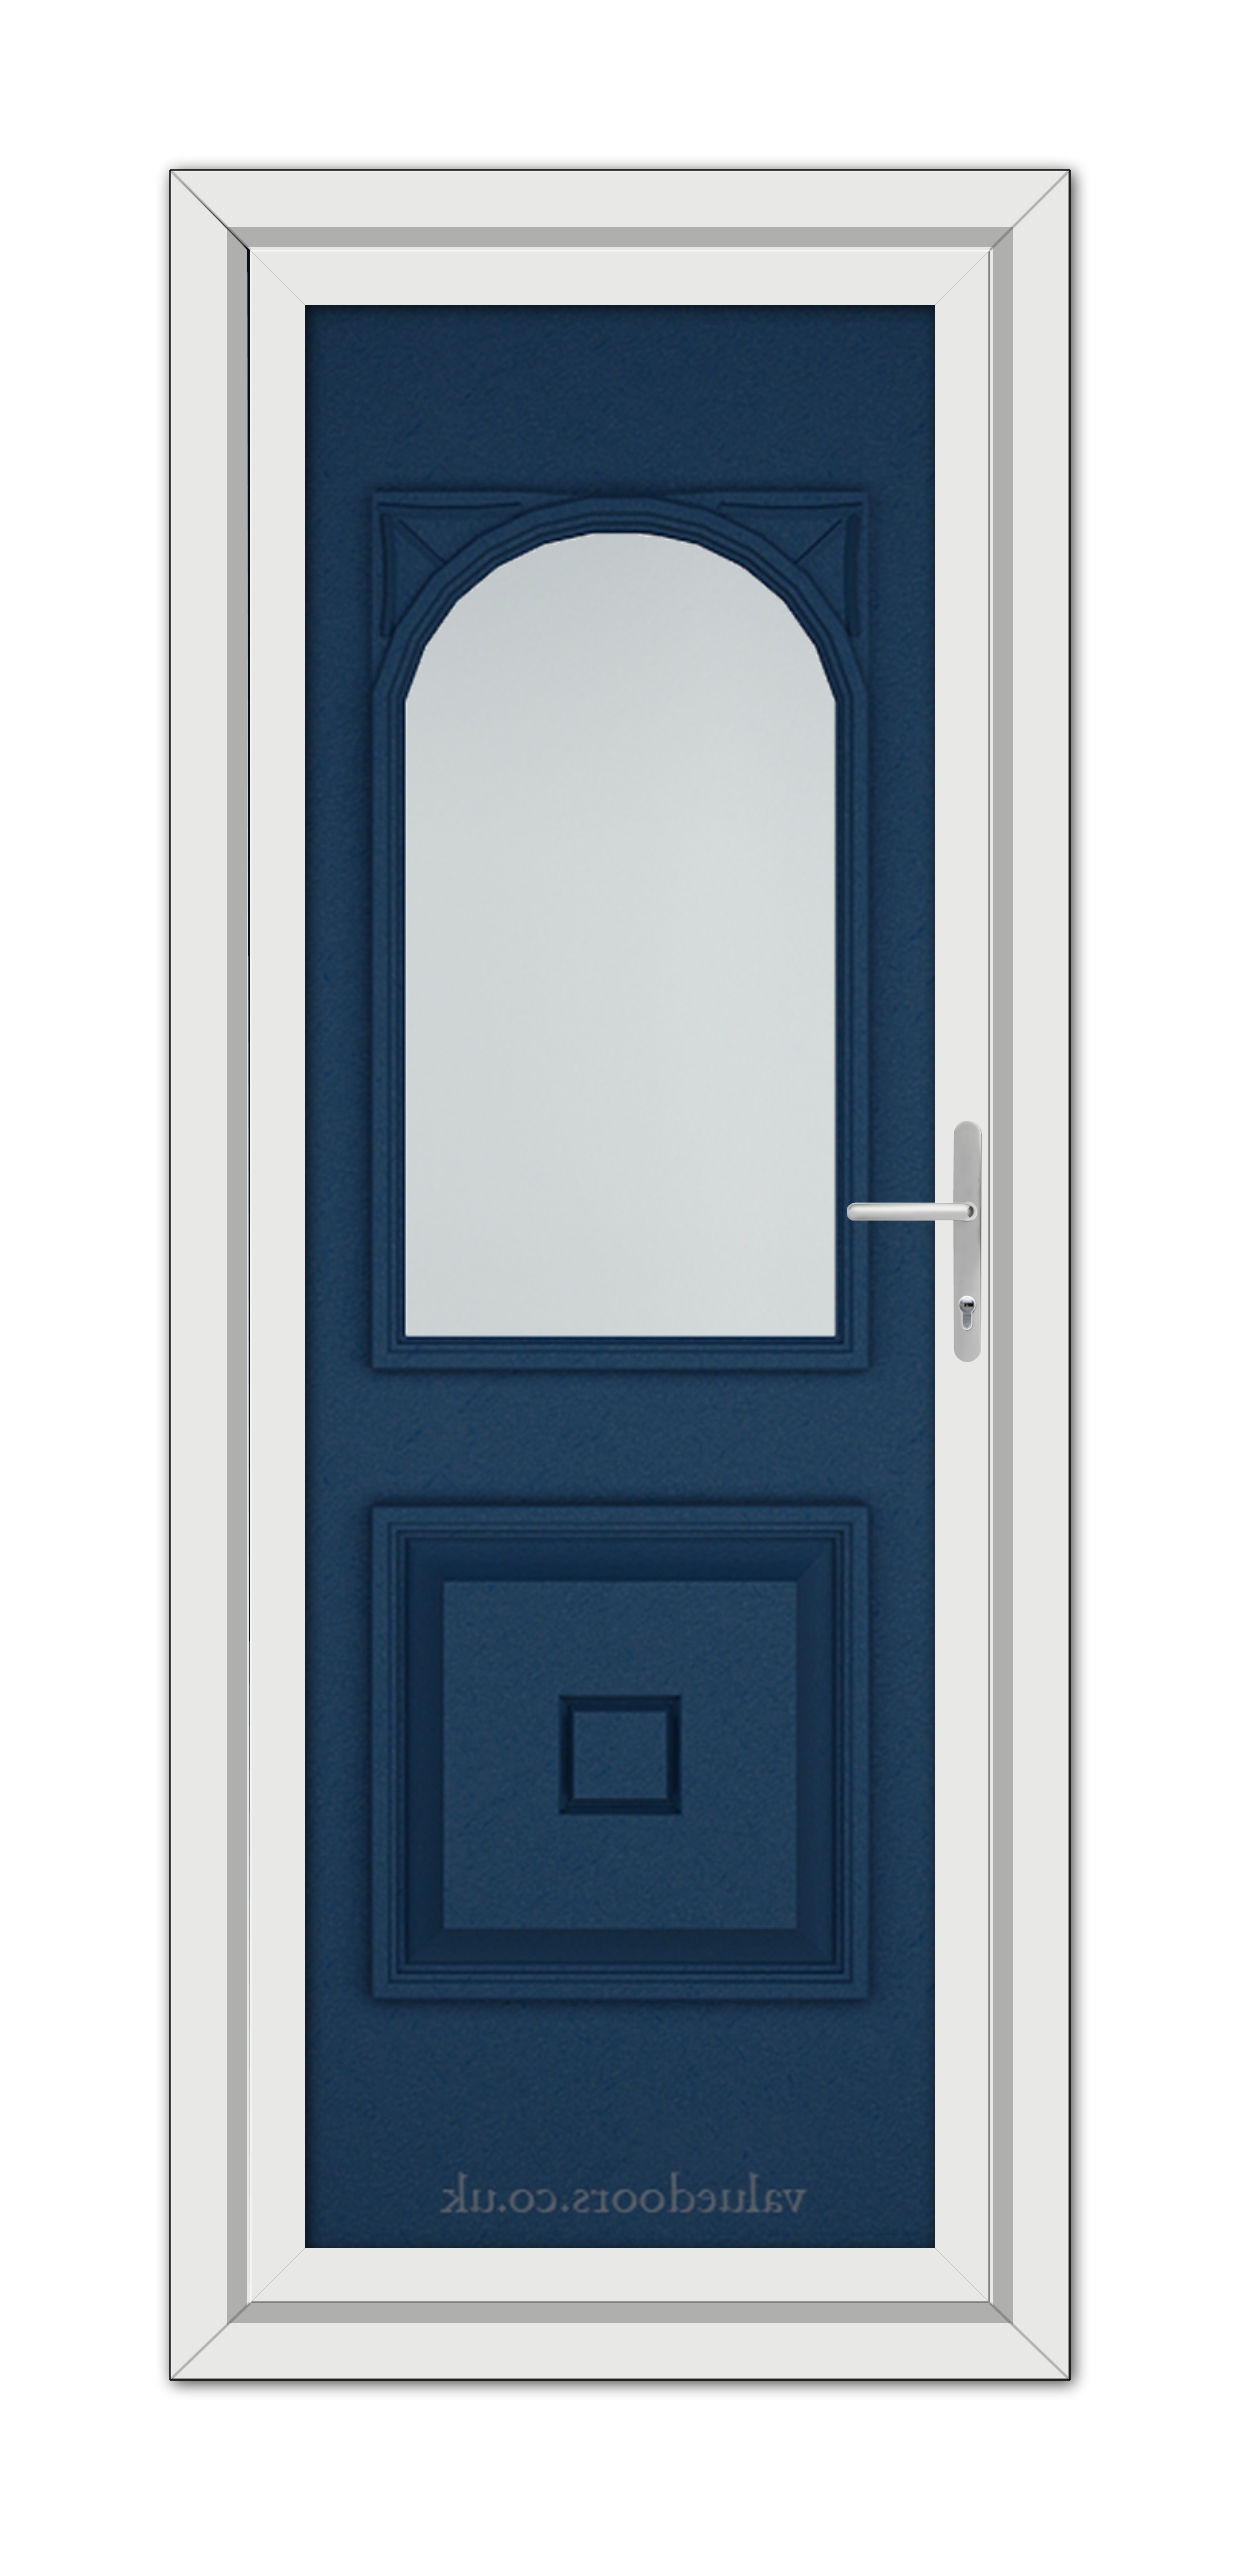 A vertical image of a closed, Blue Reims uPVC door with a white frame, featuring an oval-shaped window at the top and a silver handle on the right.